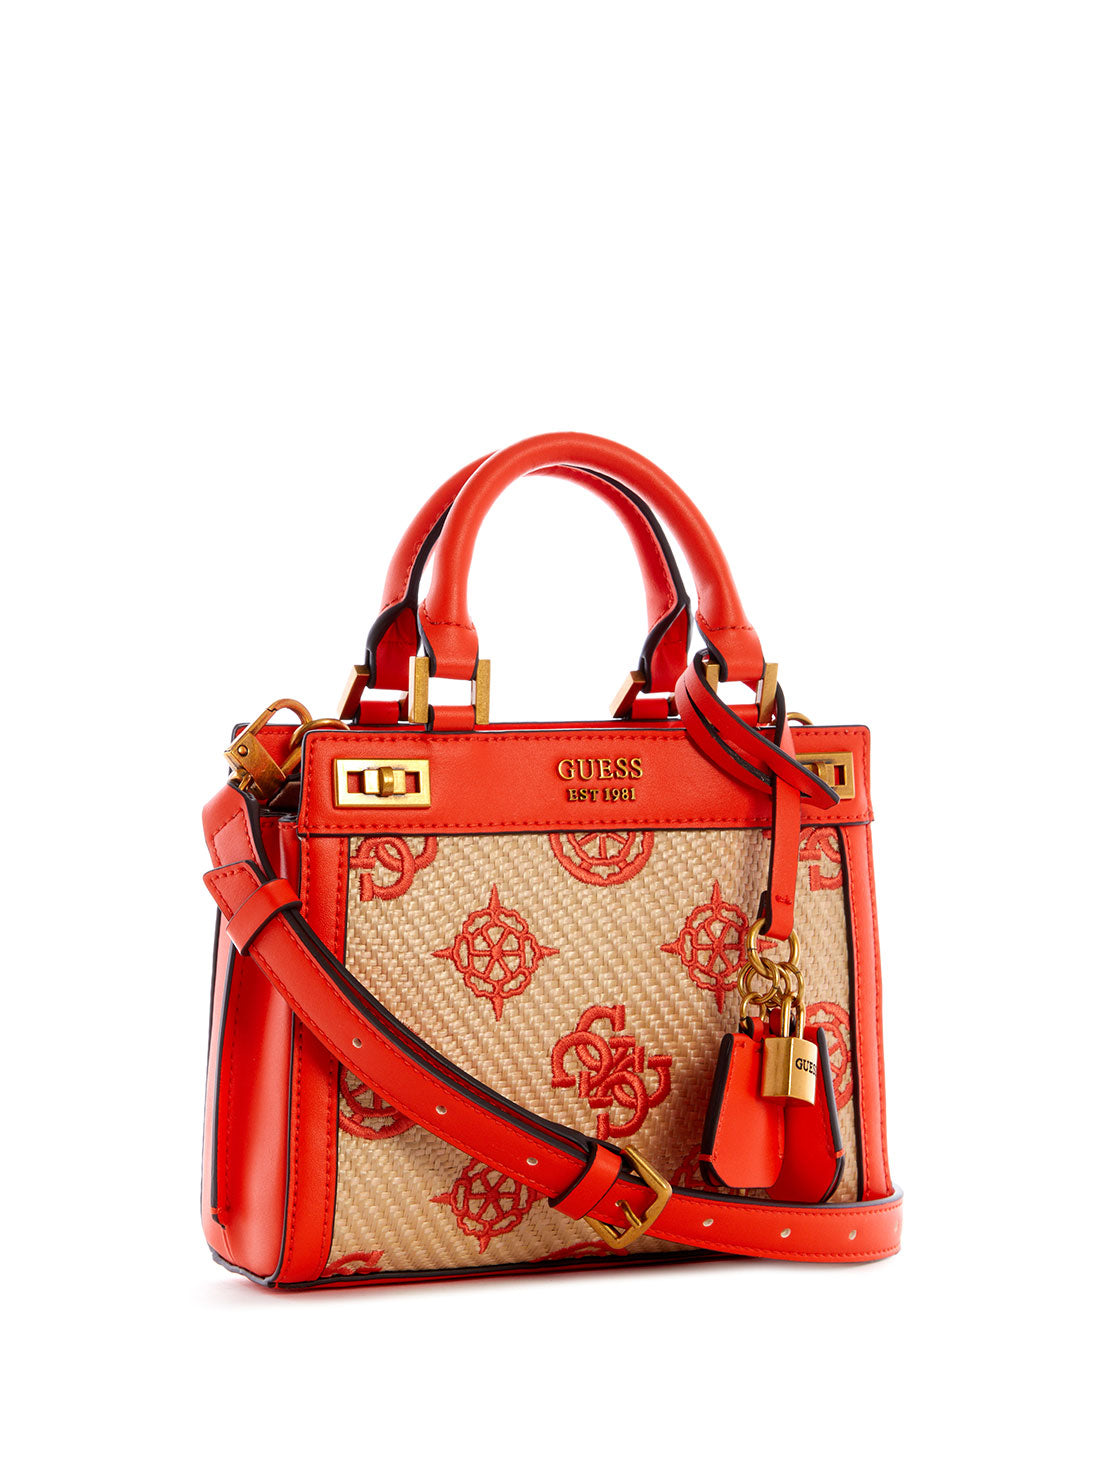 GUESS Women's Red Katey Mini Raffia Satchel Bag RB787073 Front Side View